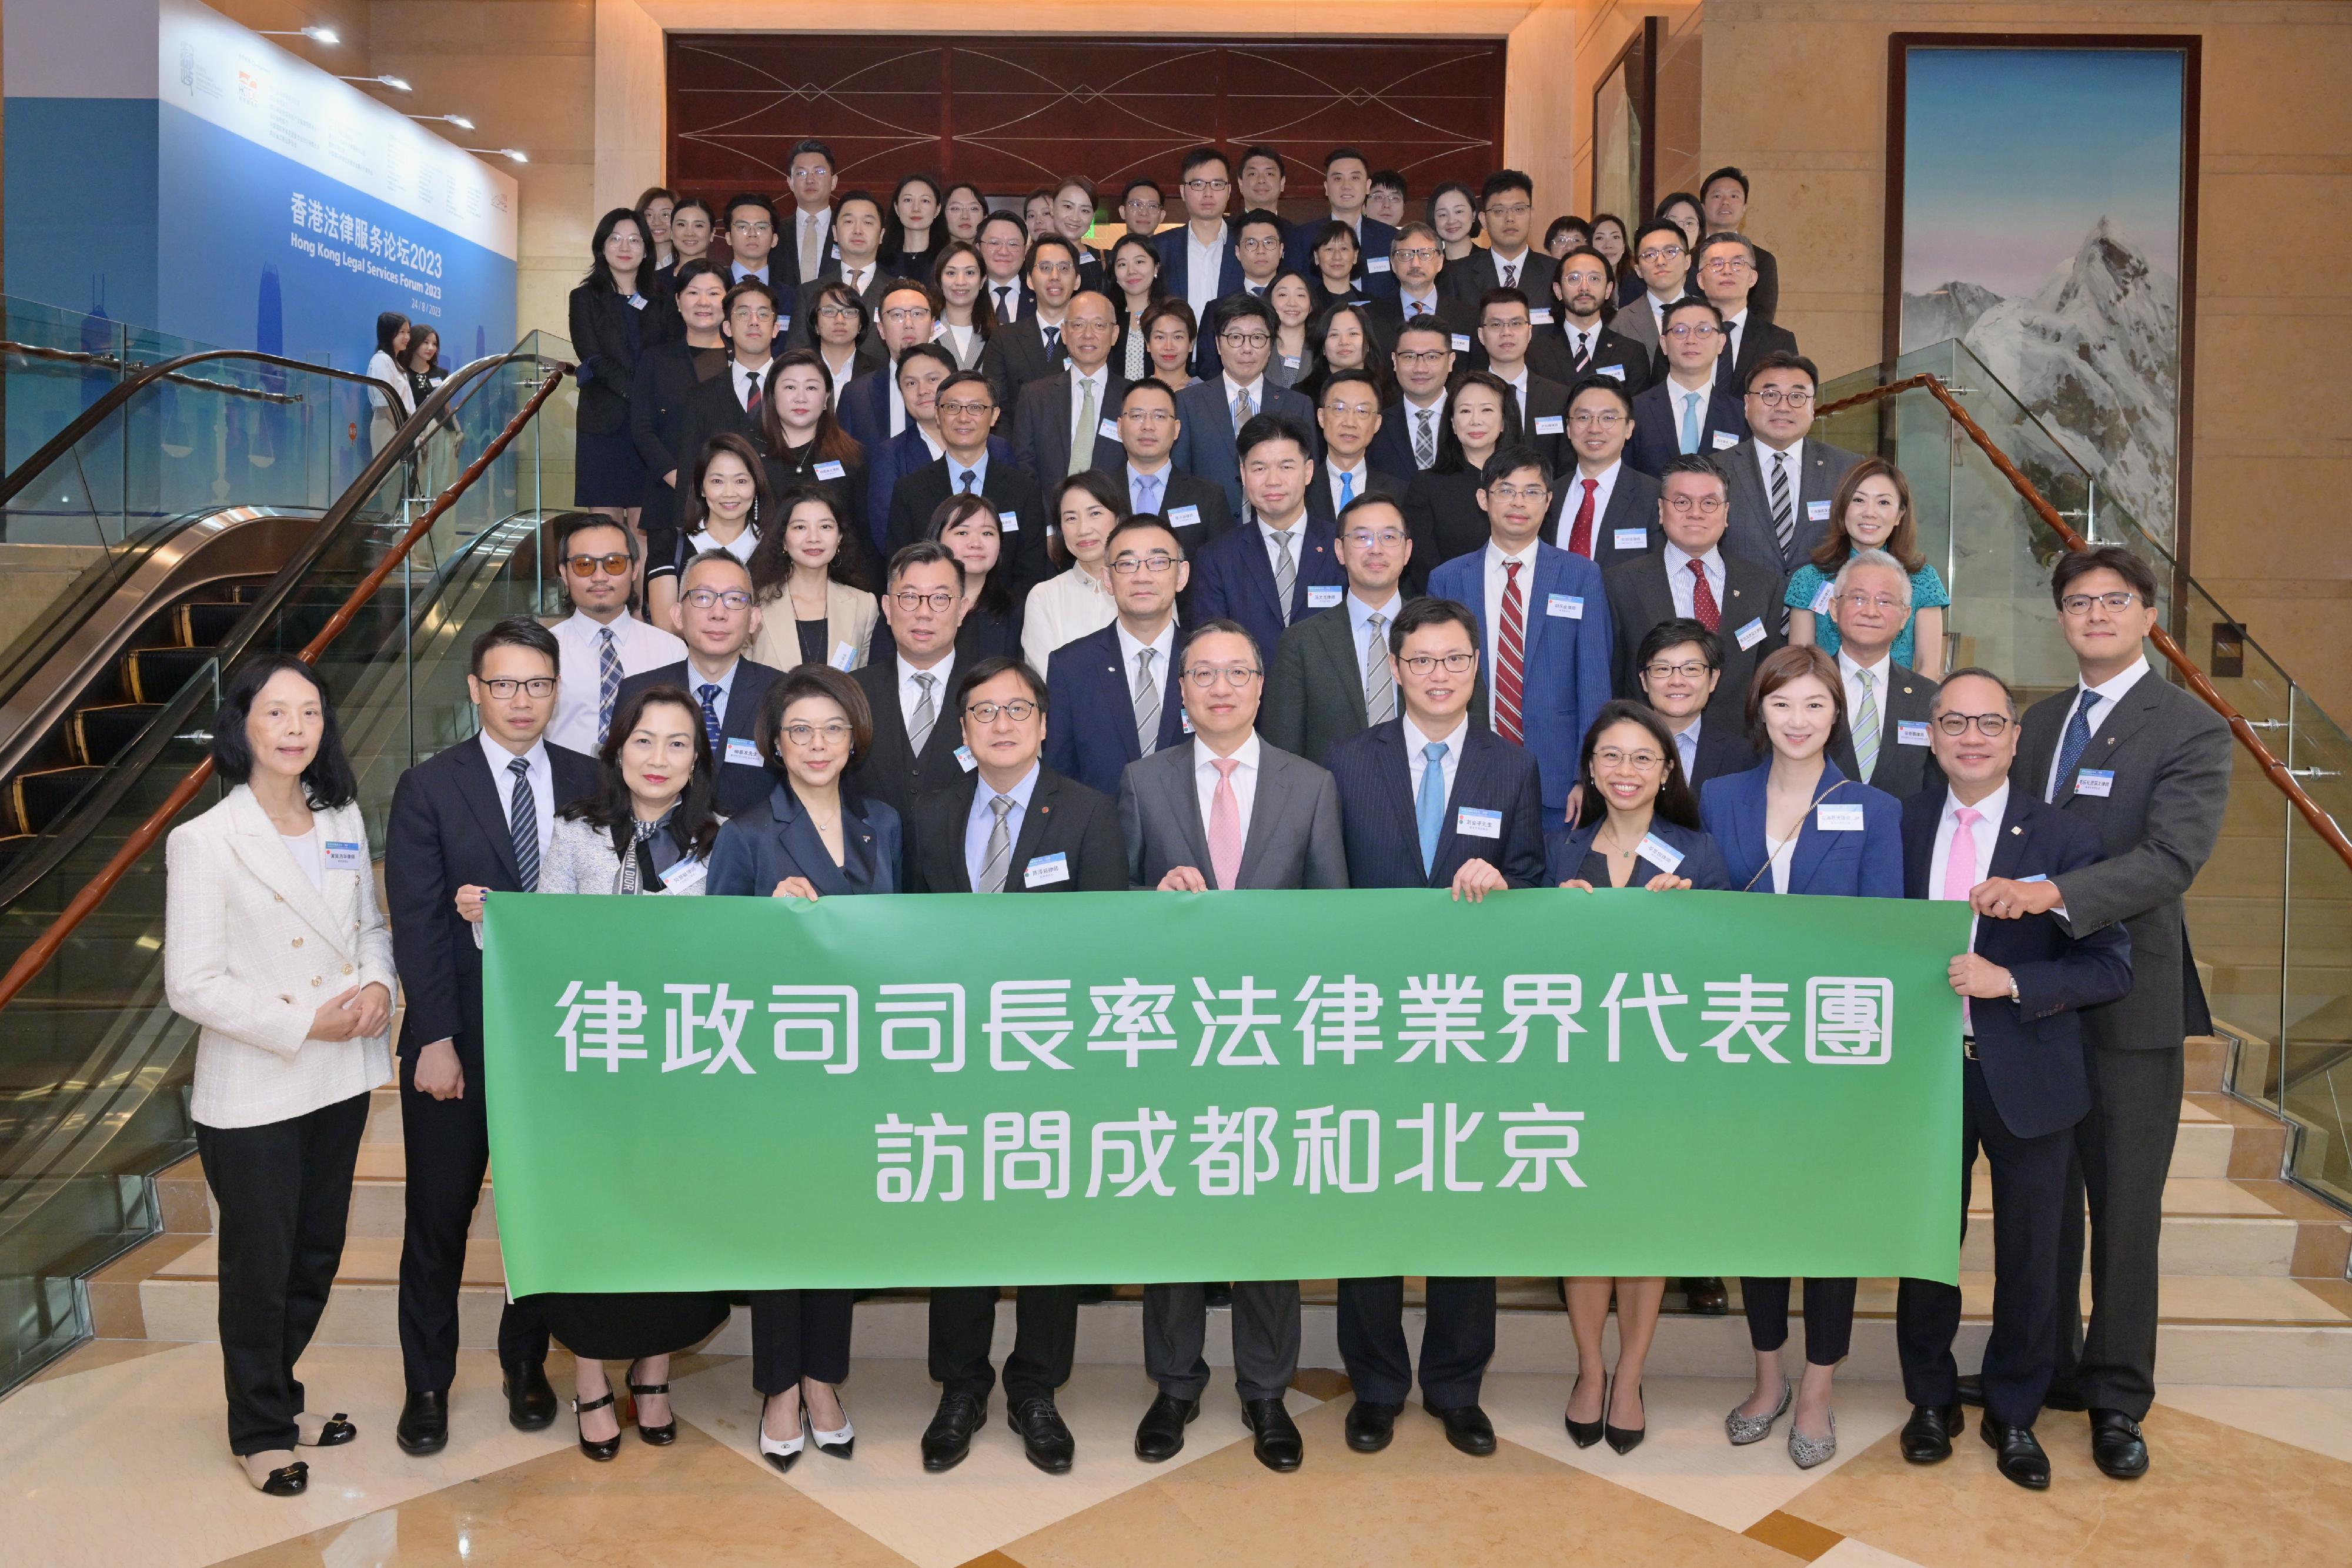 The Secretary for Justice, Mr Paul Lam, SC, led a Hong Kong legal and dispute resolution sector delegation to attend the sixth Hong Kong Legal Services Forum organised by the Department of Justice and co-organised by the Hong Kong Trade Development Council today (August 24) in Chengdu. Photo shows Mr Lam (front row, centre); Deputy Executive Director of the Hong Kong Trade Development Council Mr Patrick Lau (front row, fifth right); Vice-Chairman of the Hong Kong Bar Association Mr José-Antonio Maurellet, SC (front row, first right); the President of the Law Society of Hong Kong, Mr Chan Chak-ming (front row, fifth left), and other members of the delegation at the event venue.
